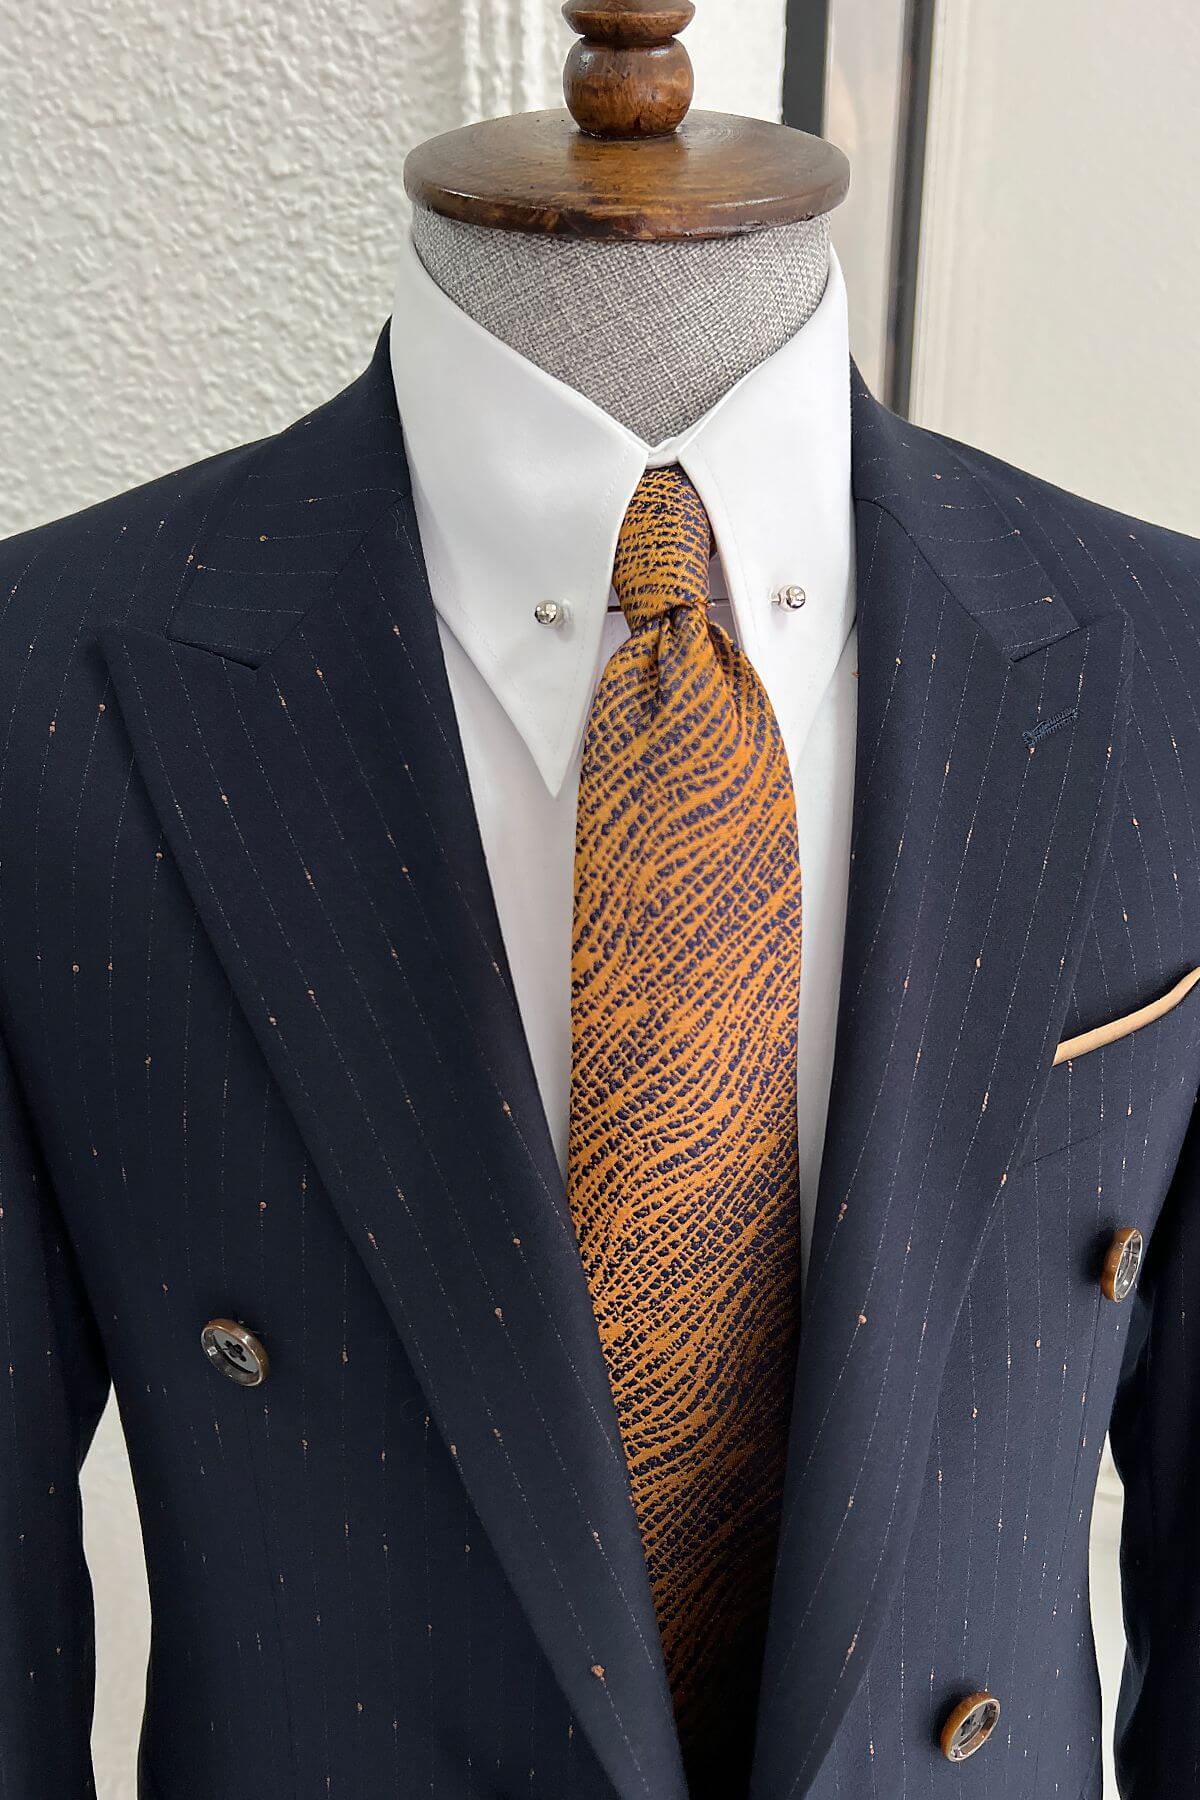 A Double-Breasted Navy-Blue Wool Suit on display